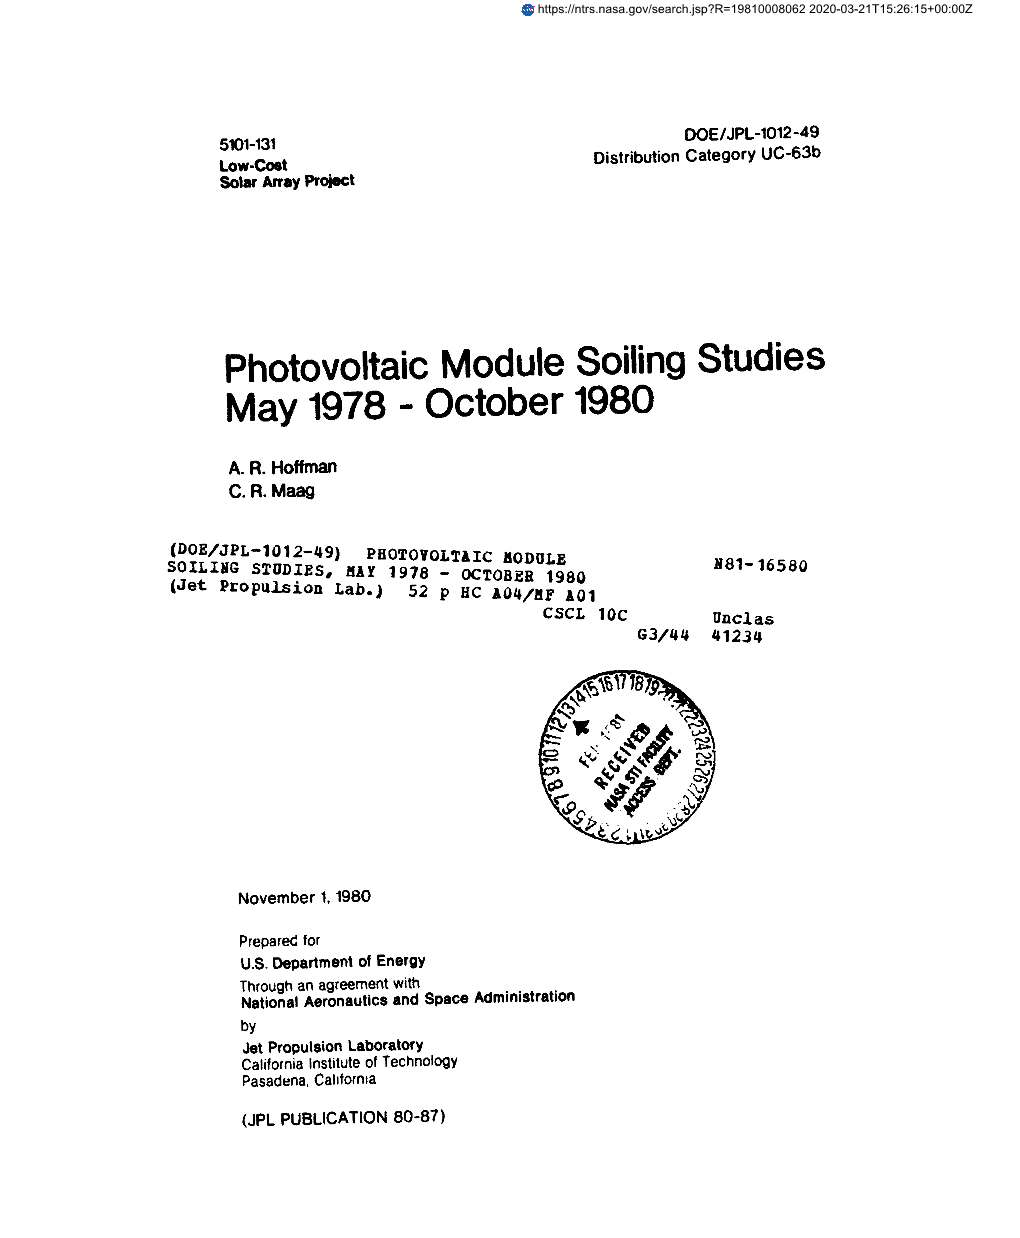 Photovoltaic Module Soiling Studies May 1978 - October 1980